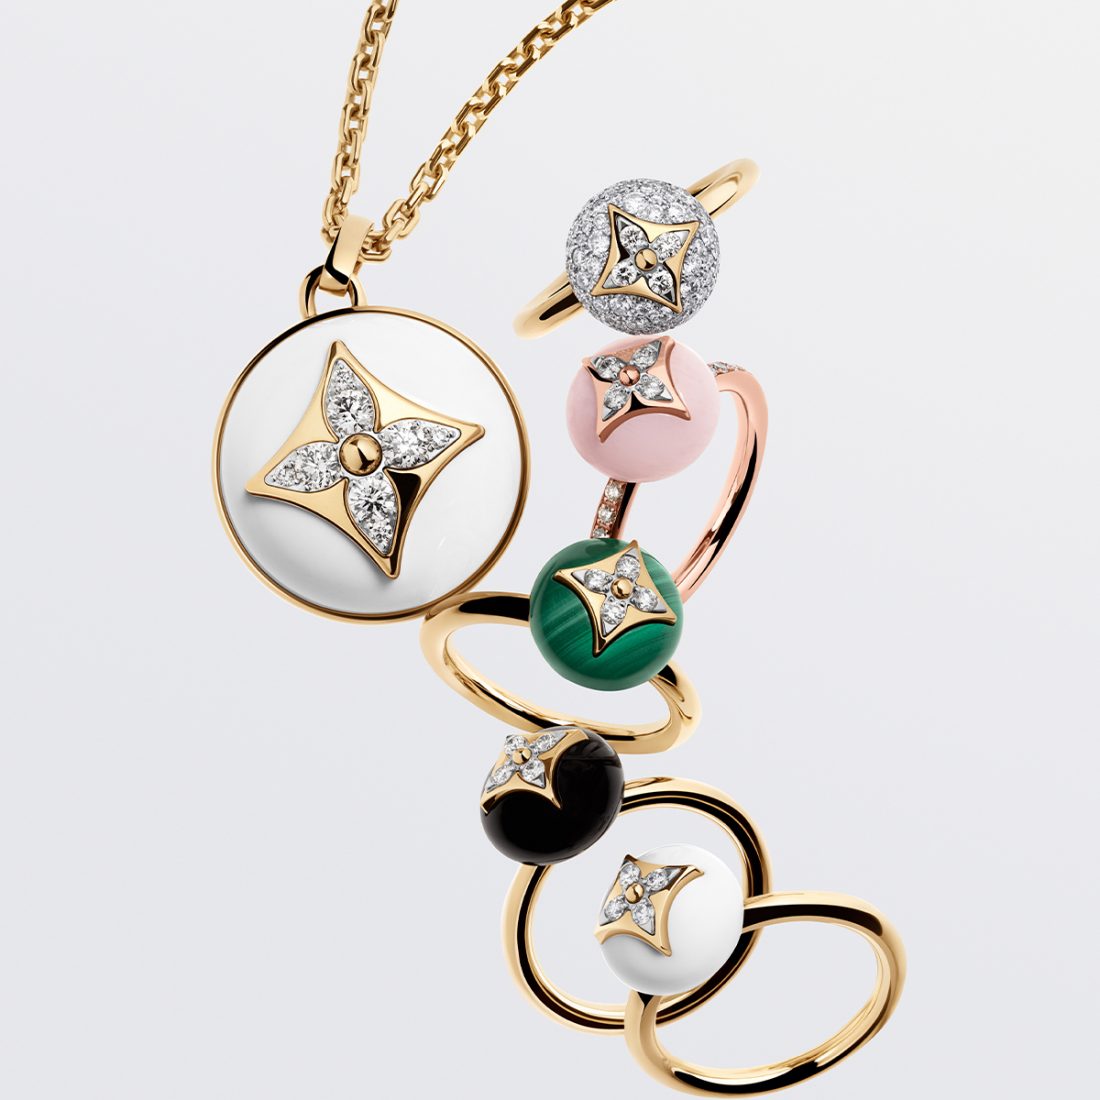 New Louis Vuitton jewellery and watches added to the Blossom